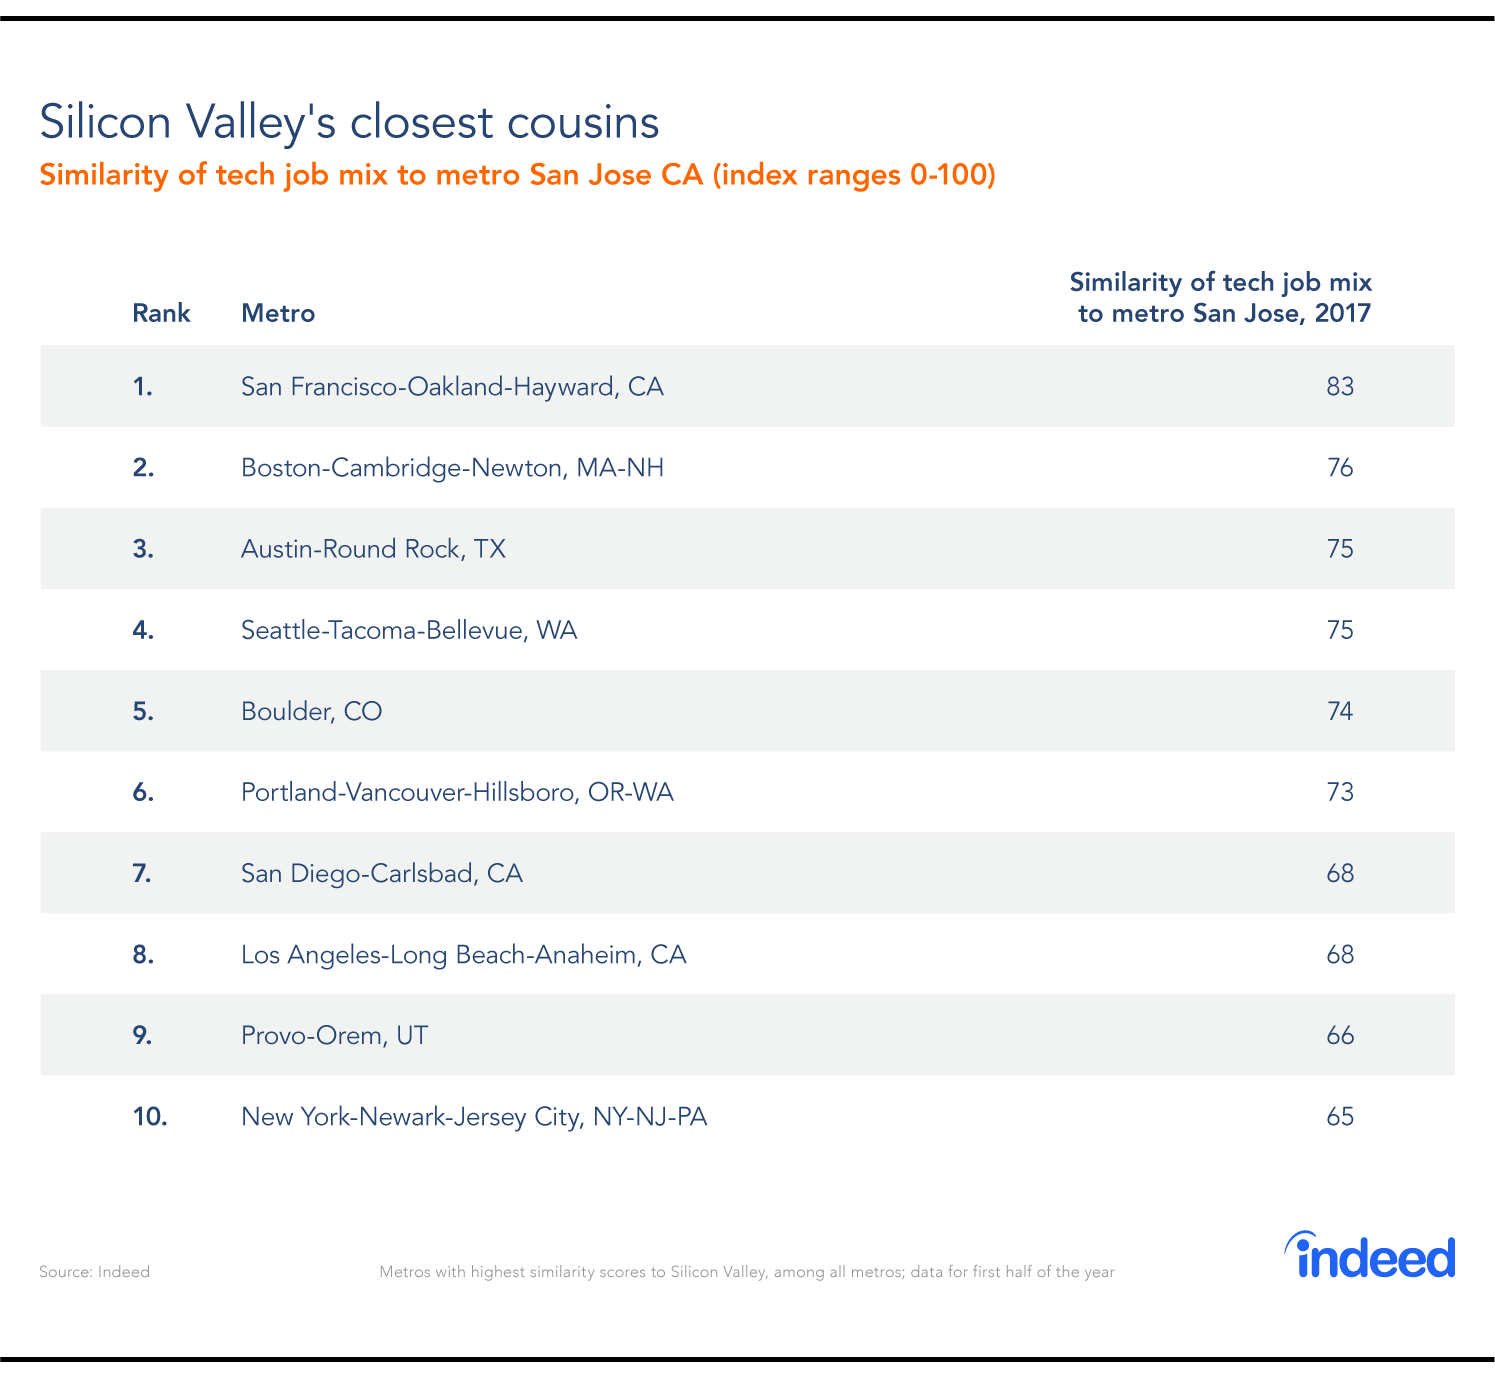 Silicon Valley's closest cousins